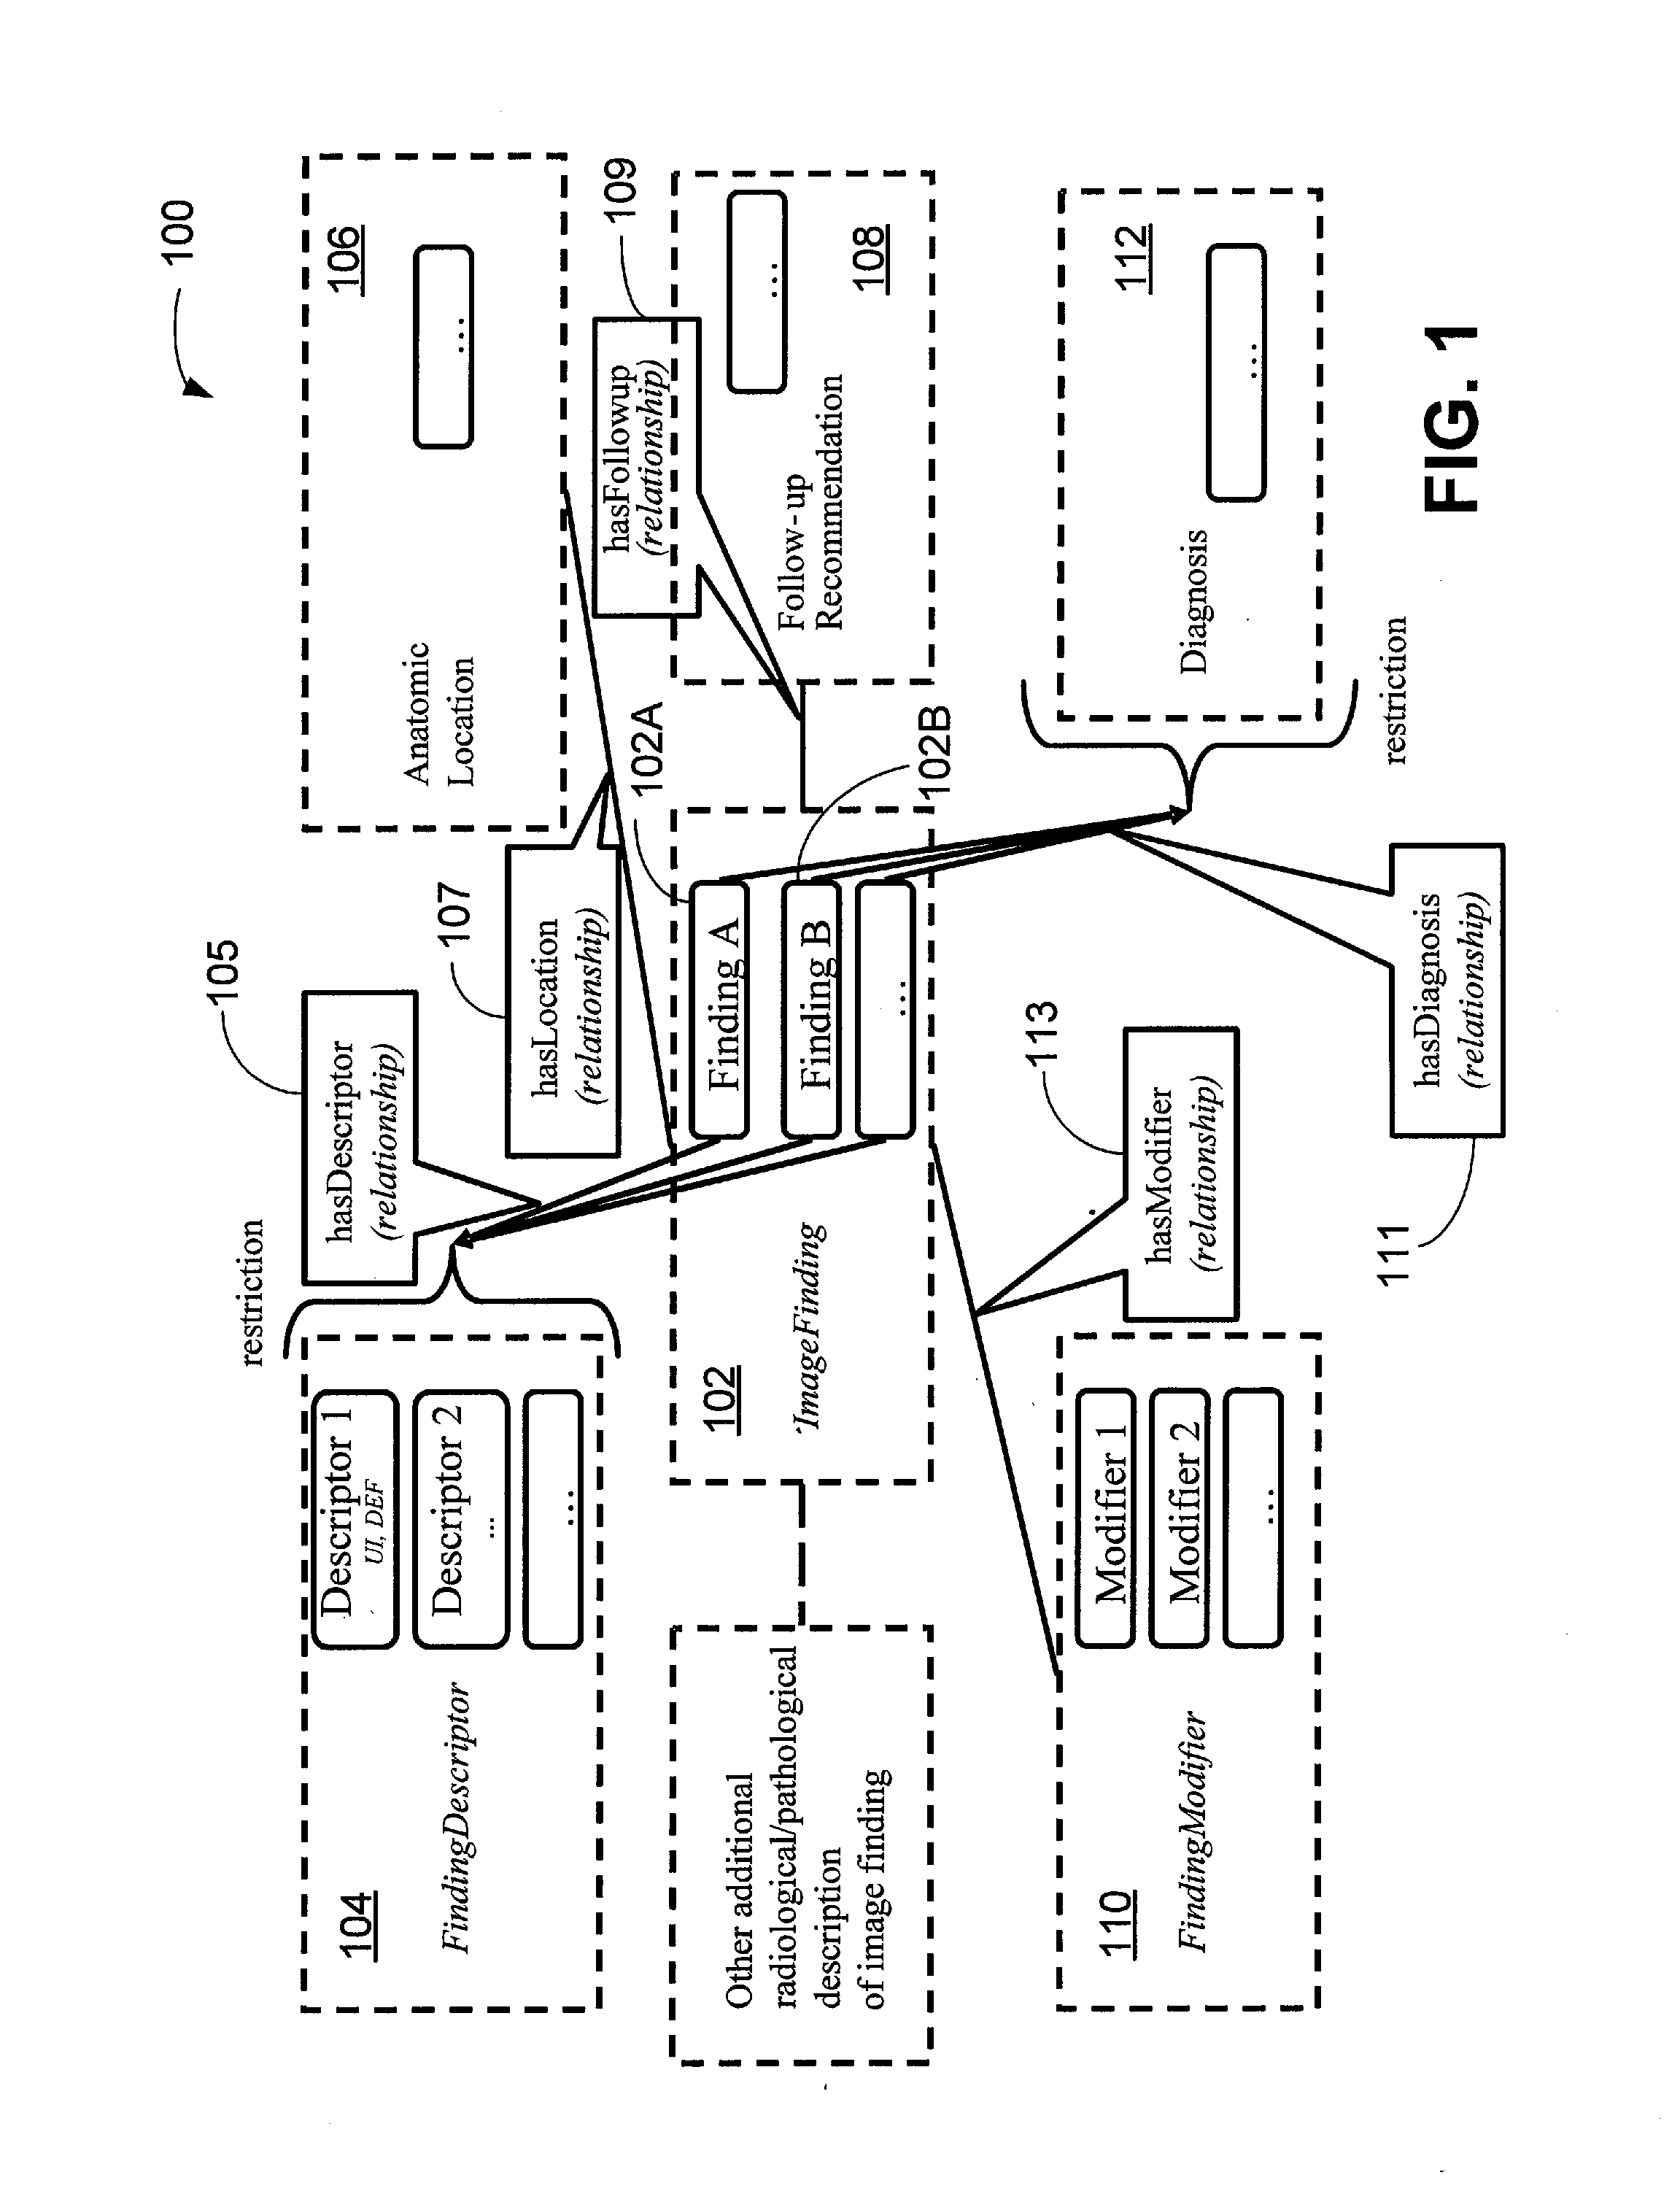 System and Method for Generating Knowledge Based Radiological Report Information Via Ontology Driven Graphical User Interface